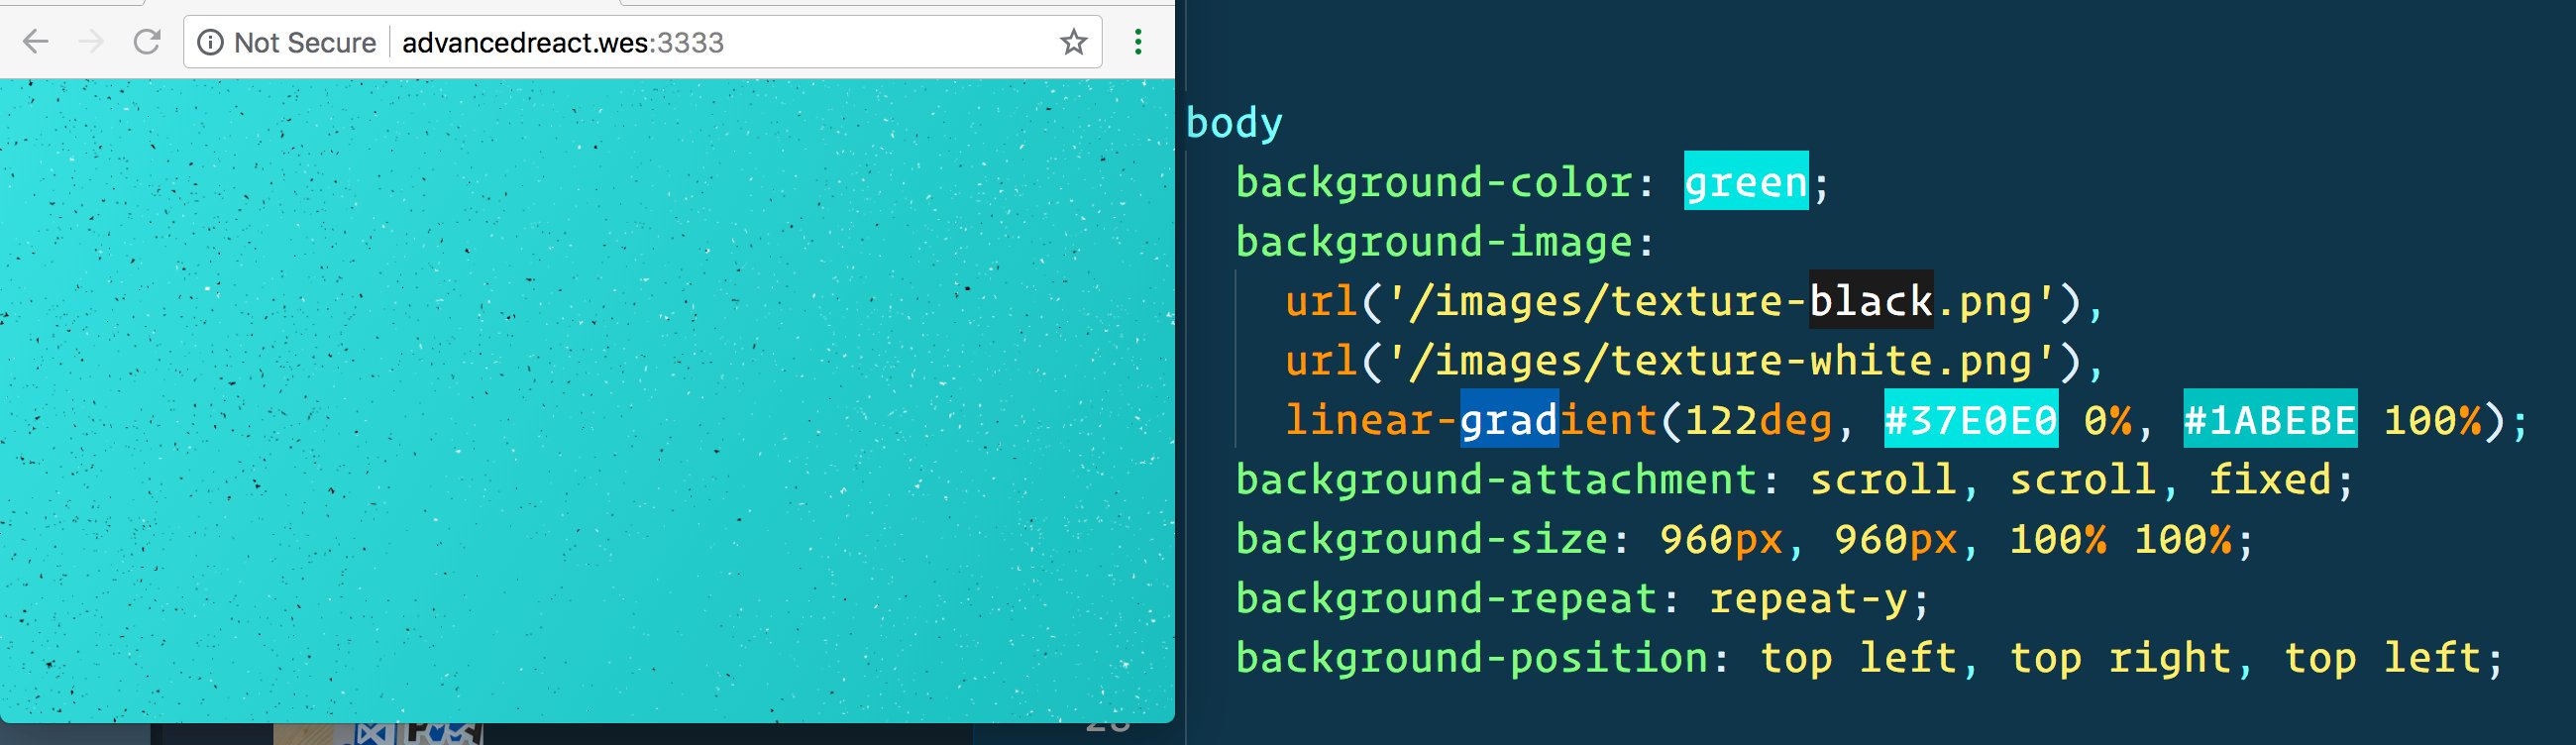 Wes Bos on Twitter: "🔥 All CSS background properties can take multiple values - for layering colours, gradients and textures https://t.co/kfiTpekvag" / Twitter